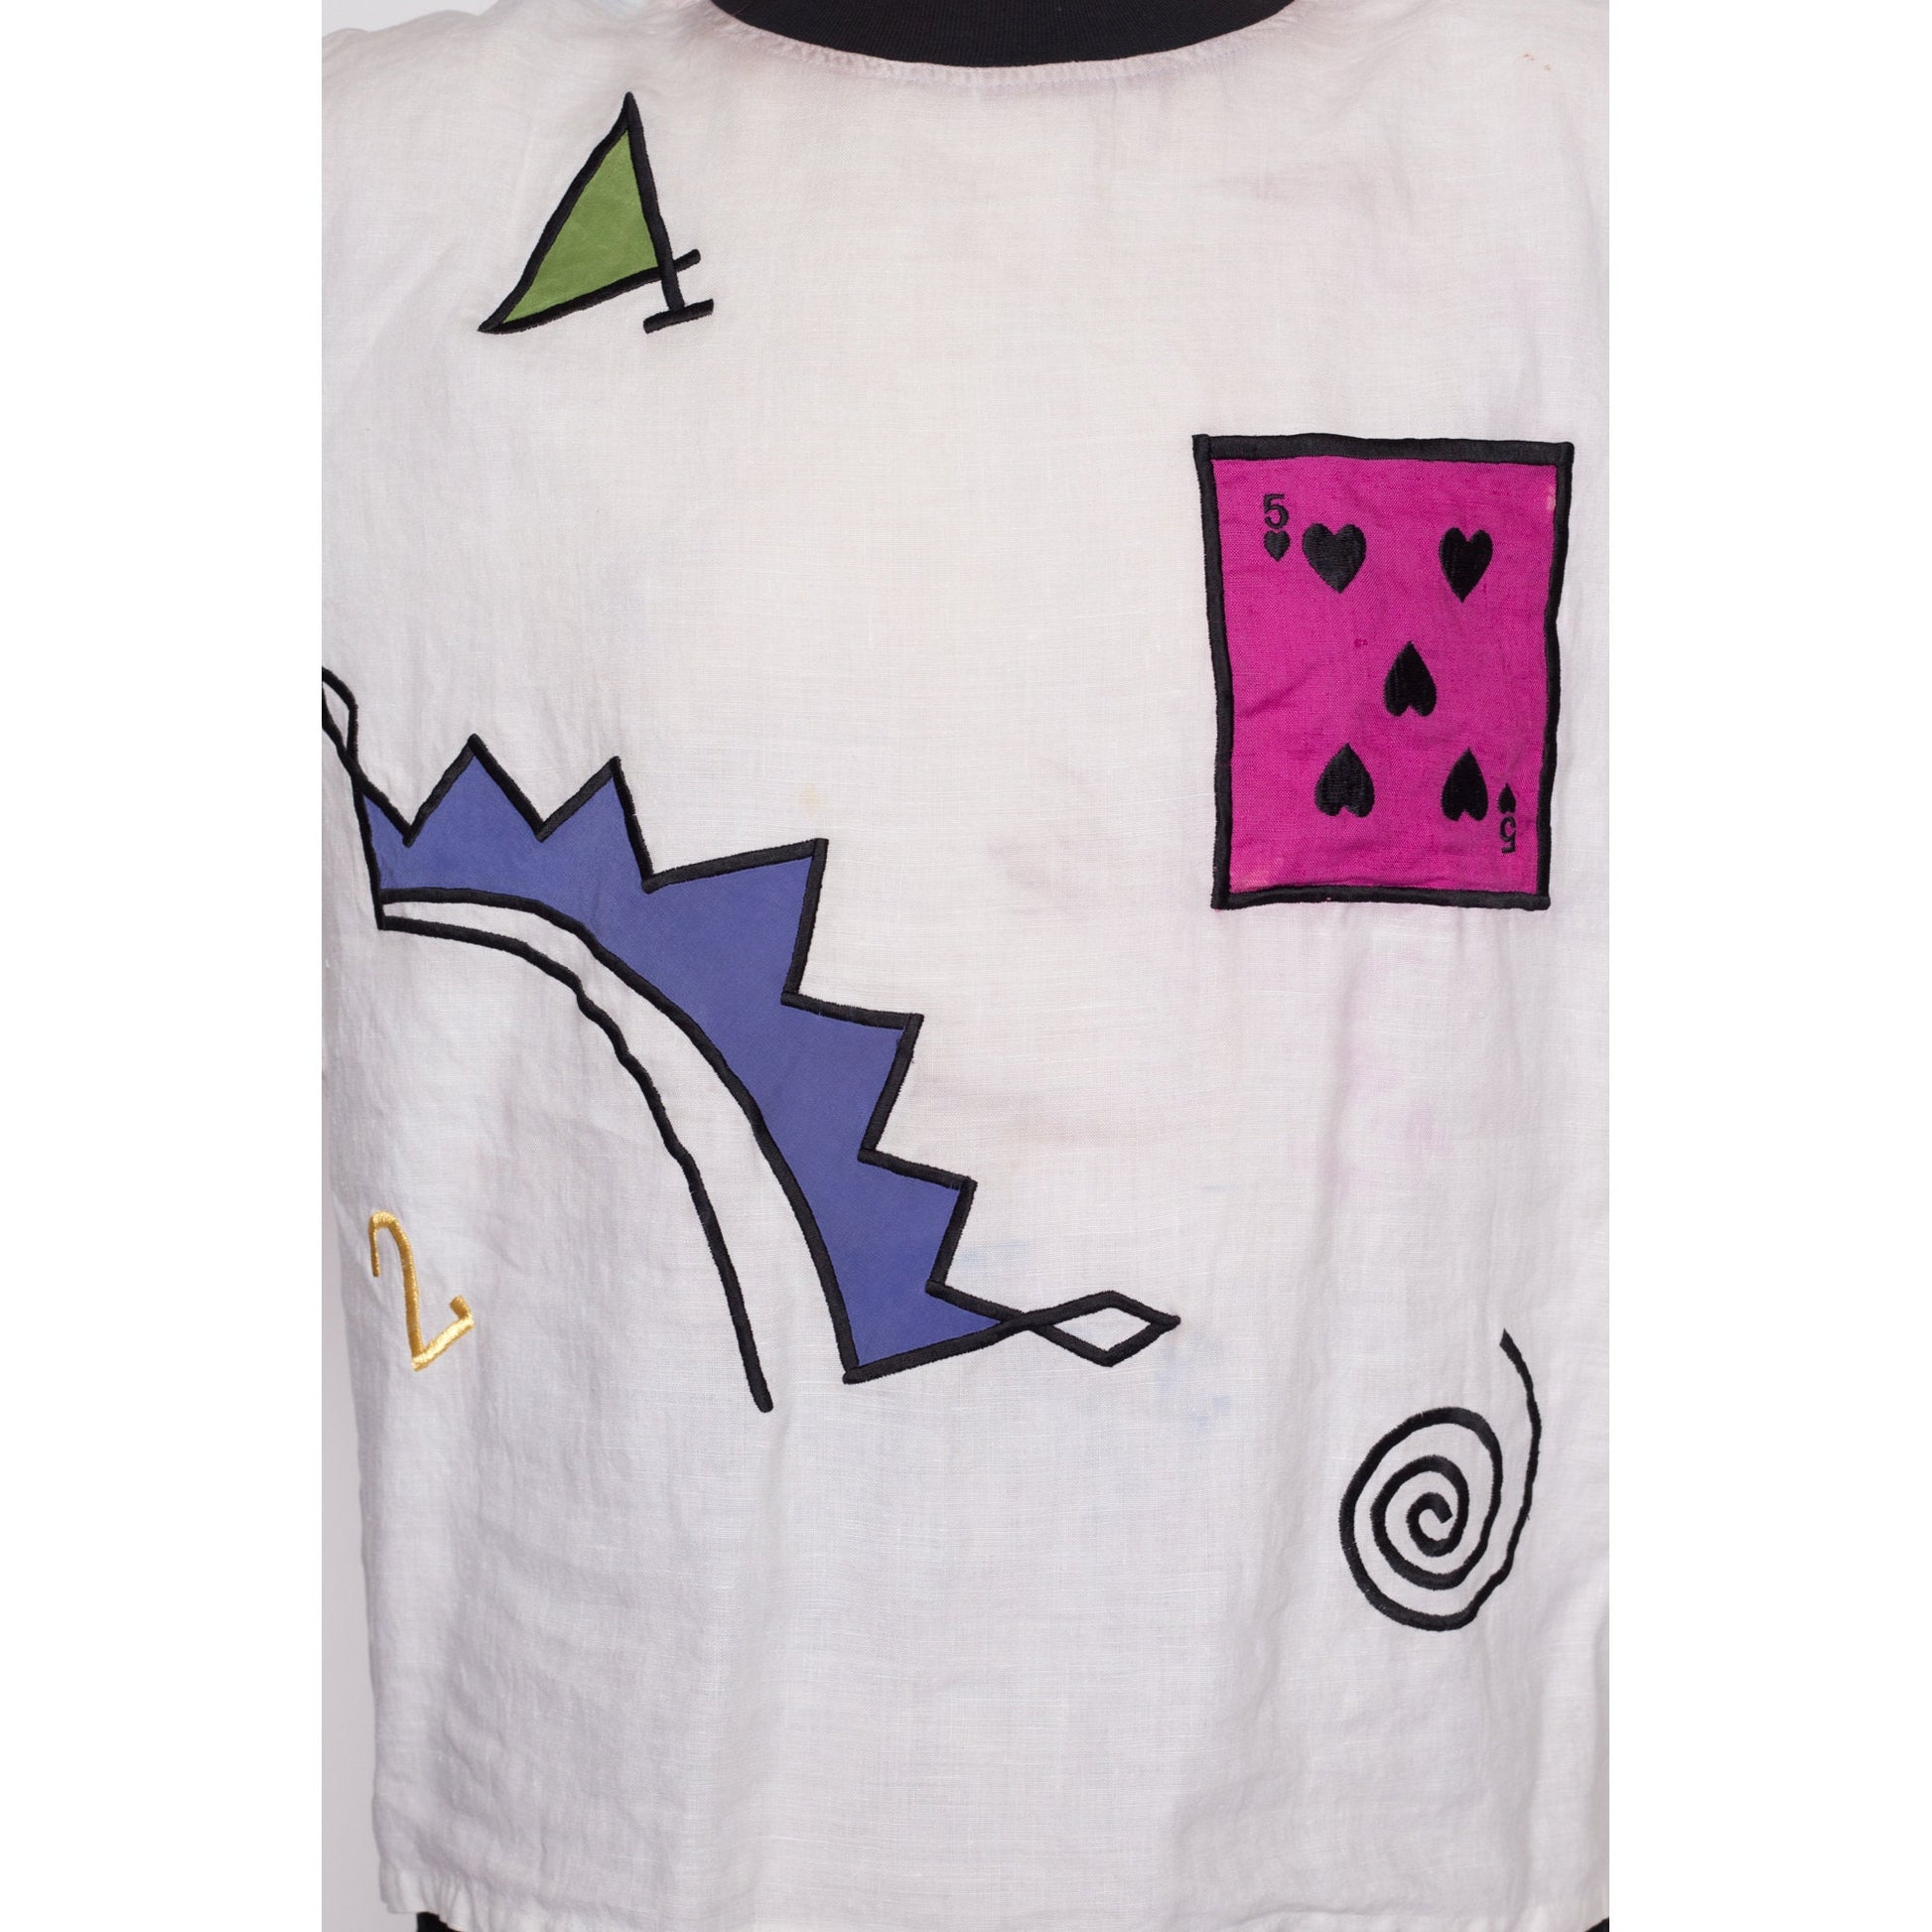 M| 80s Distressed Linen Playing Card Tee - Medium | Vintage Ann Tjian For Kenar White Novelty Patchwork Graphic T Shirt